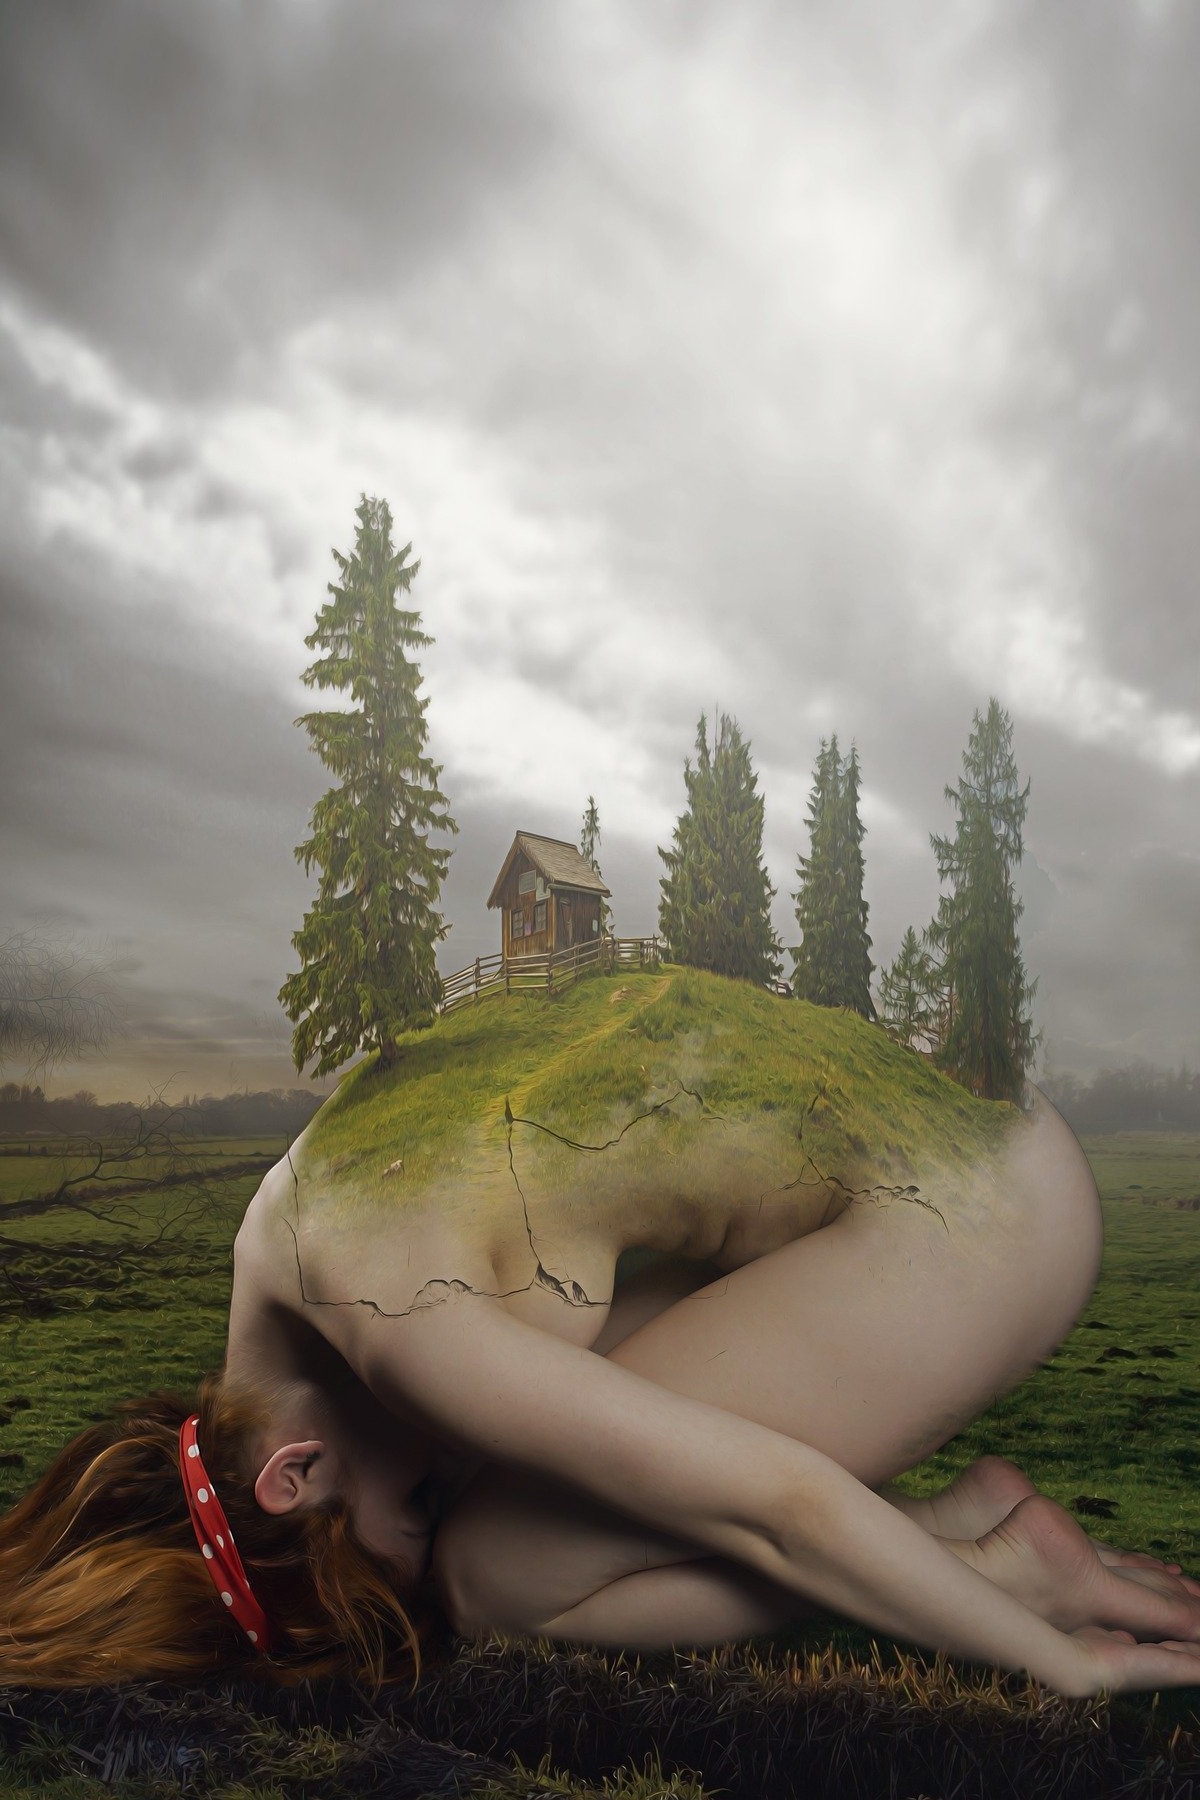 image of woman with trees growing on her back.